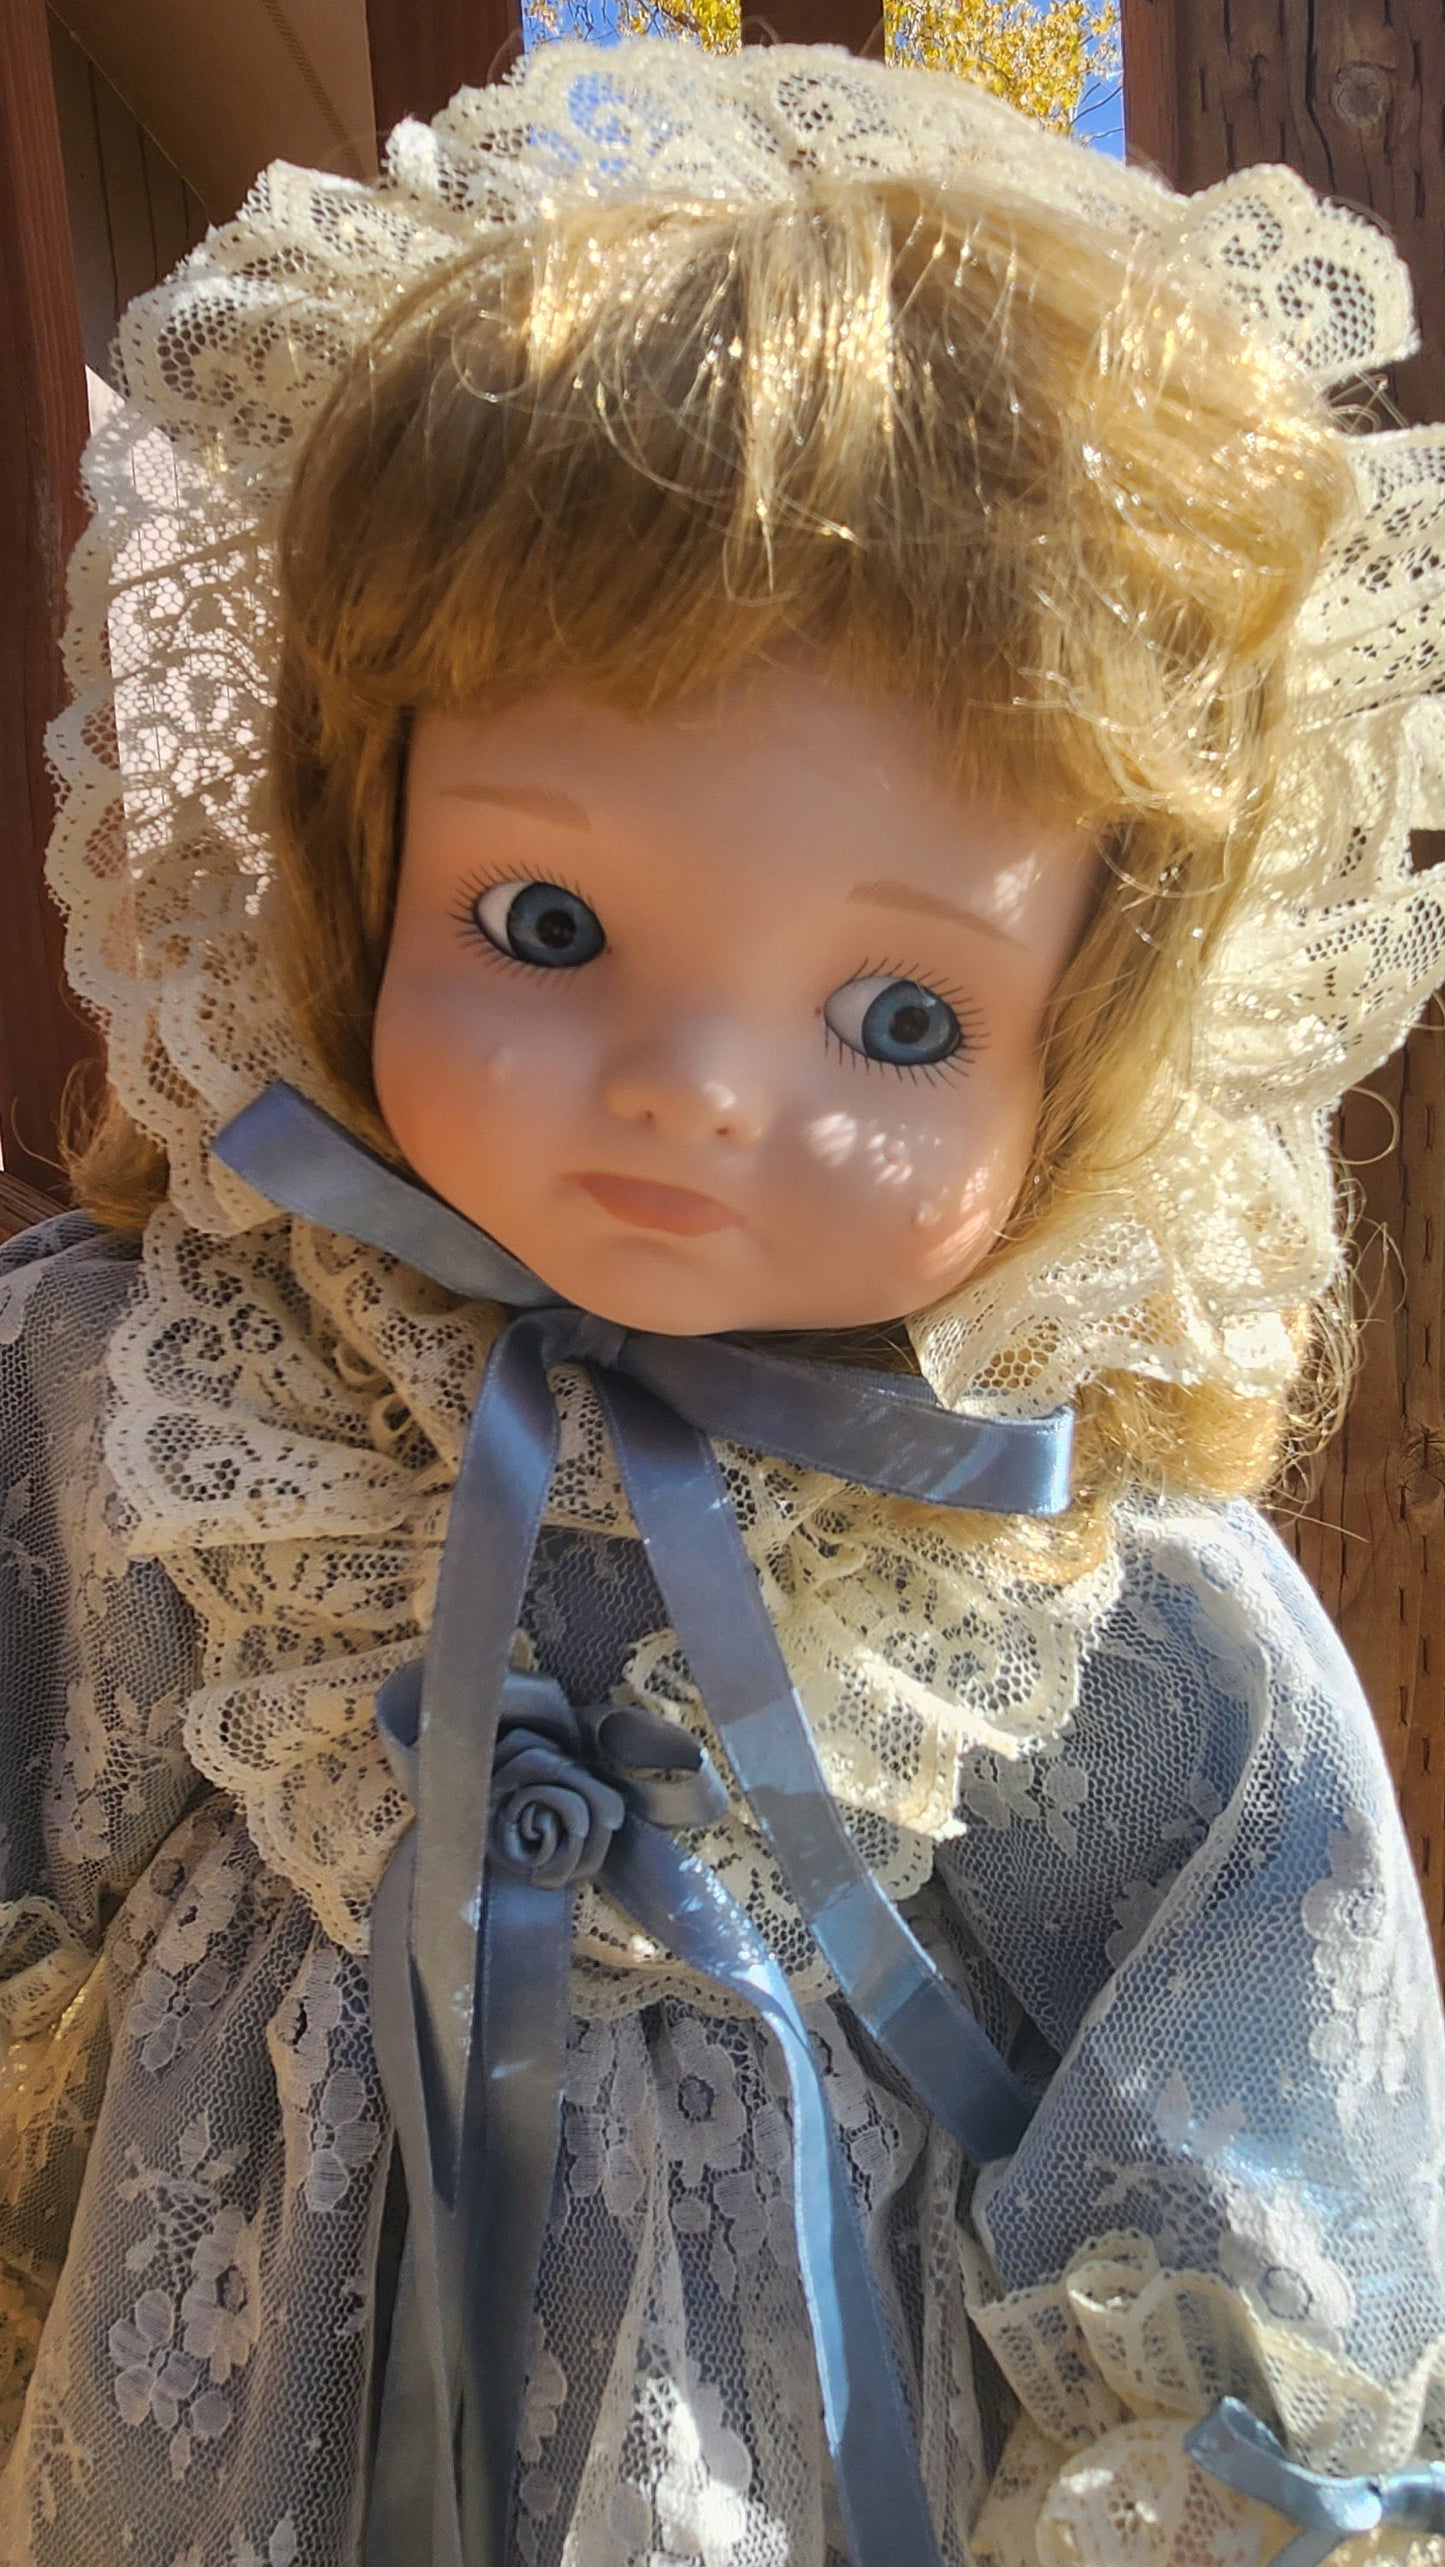 Joanne By Seymour Mann 18" Porcelain Doll Collectible